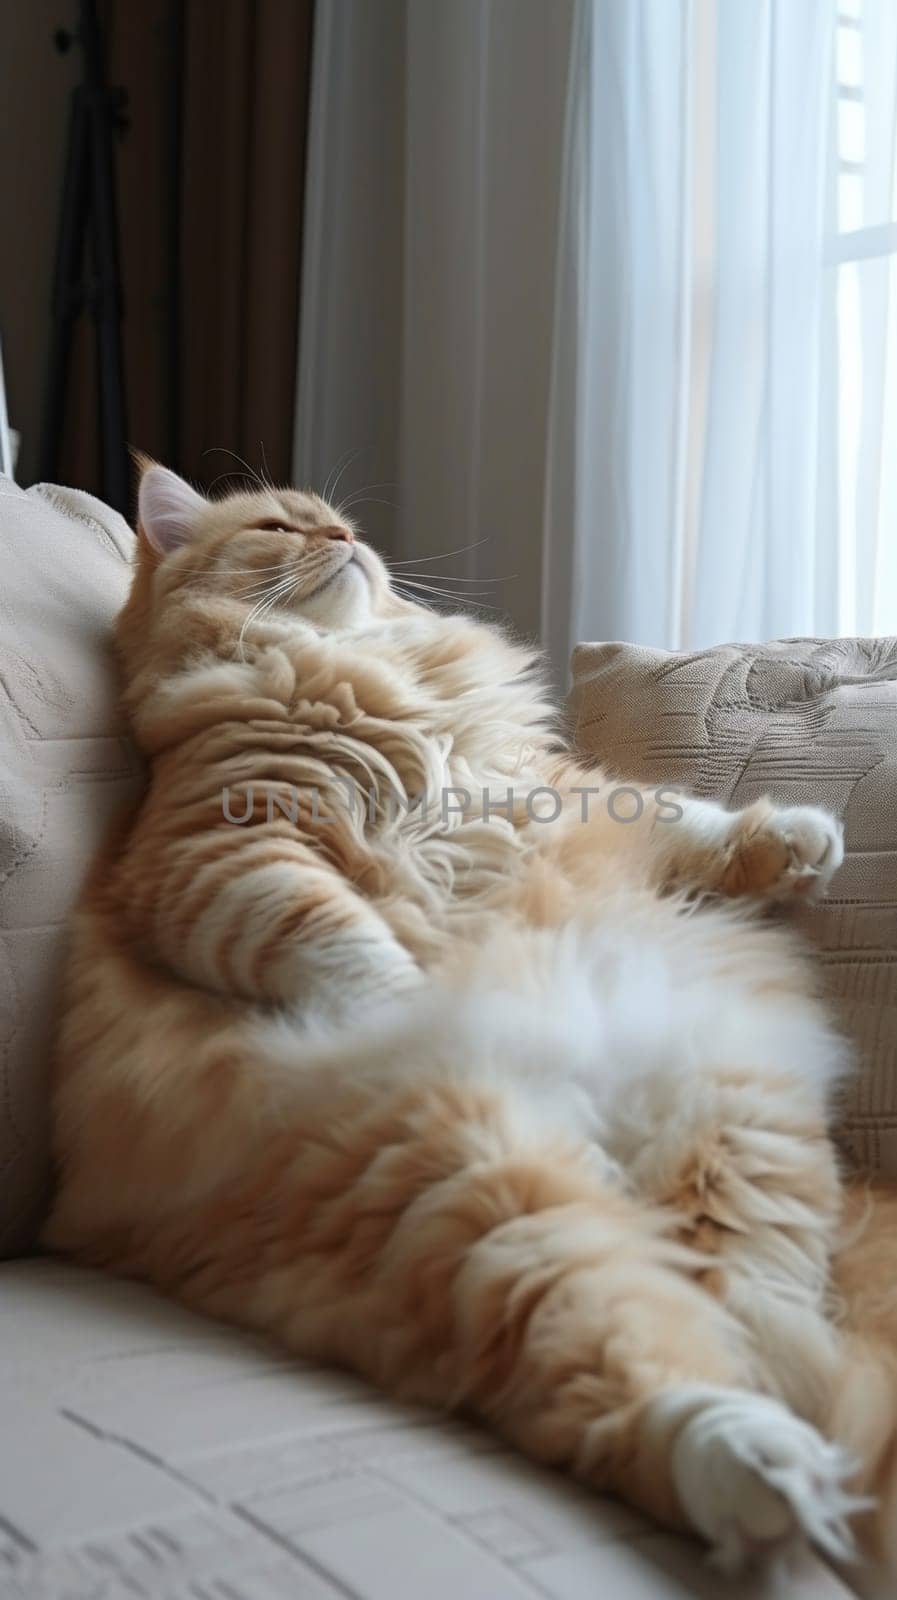 A large orange cat laying on its back in a chair, AI by starush